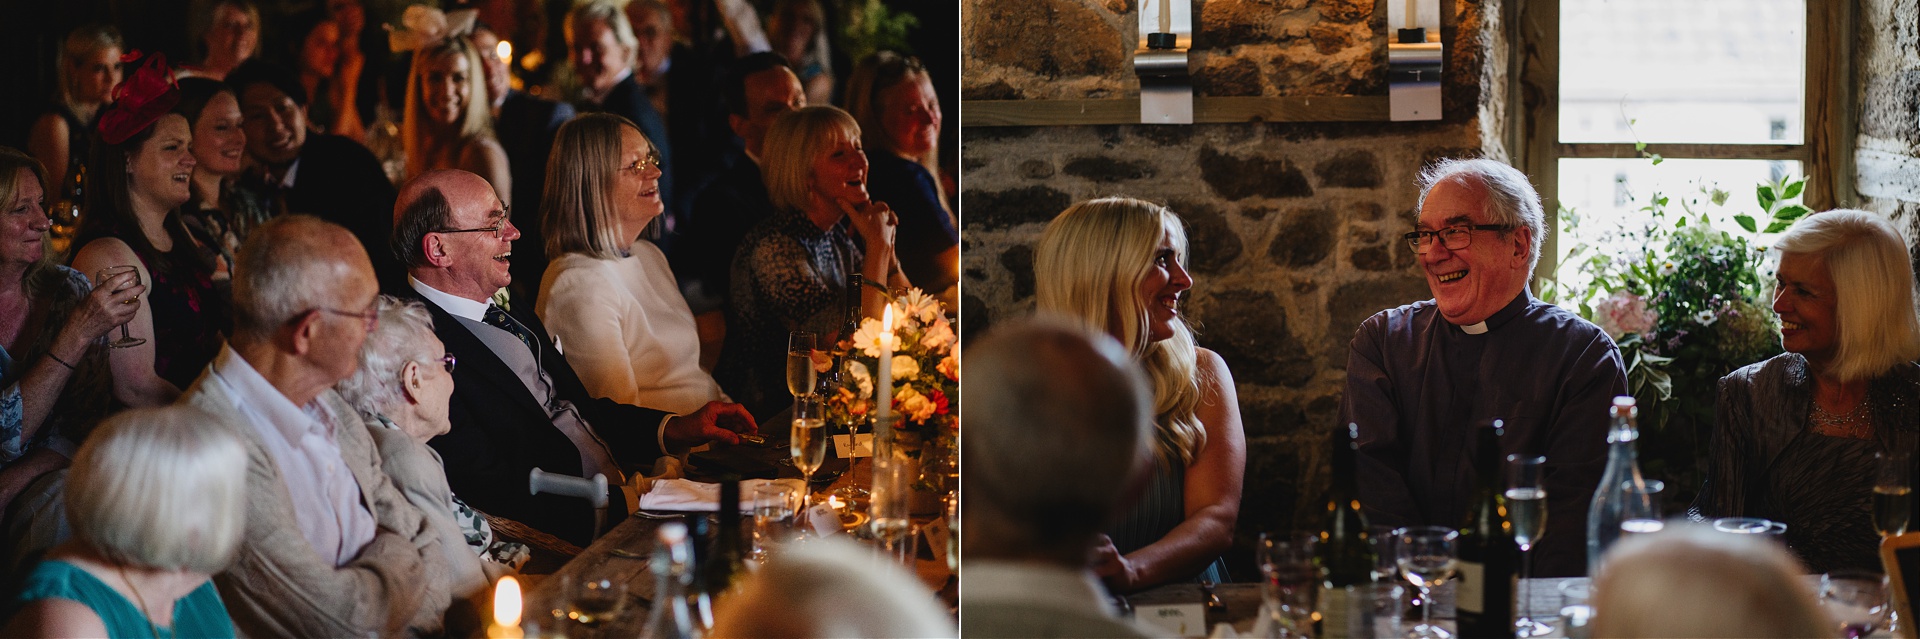 Wedding guests laughing in a stunning barn wedding venue